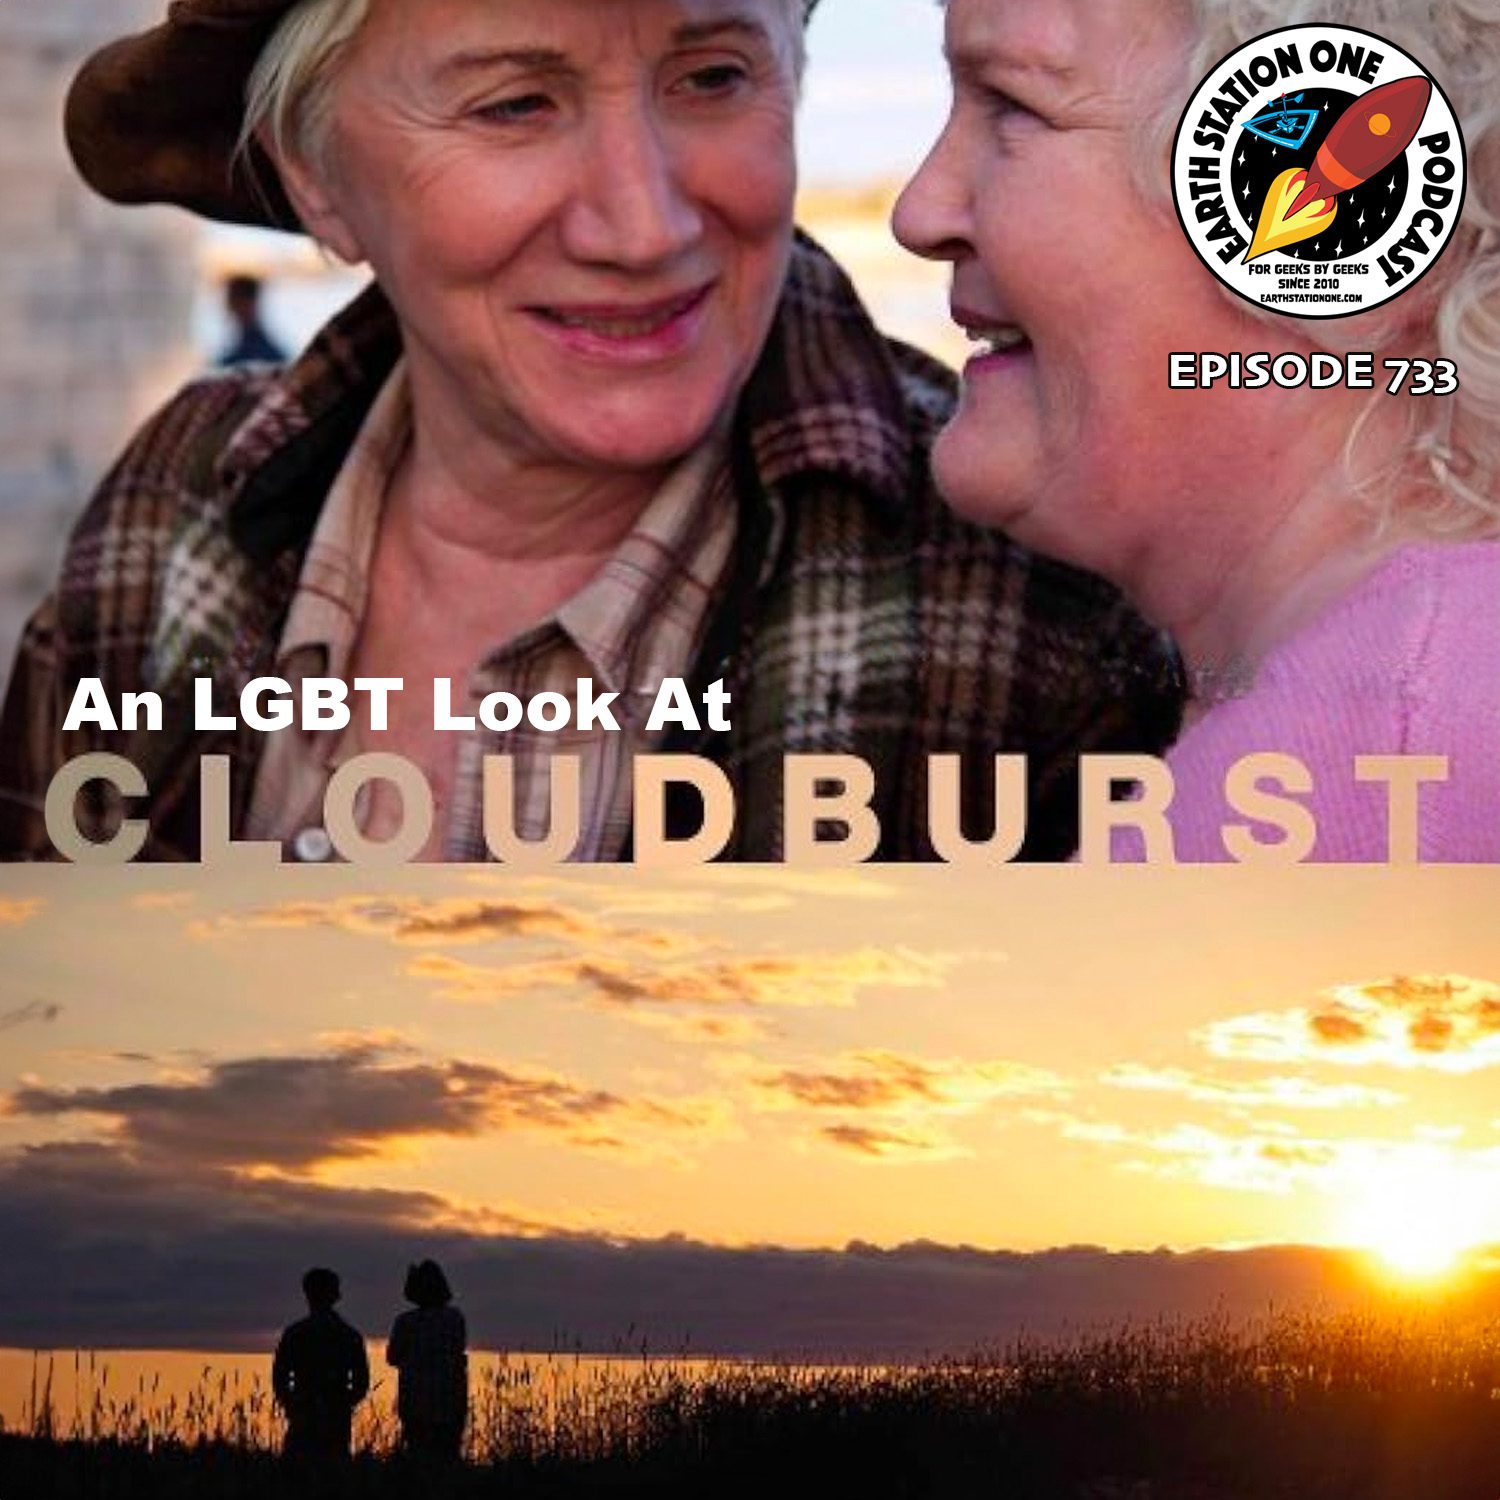 Earth Station One Ep 733 - An LGBT Look At Cloudburst